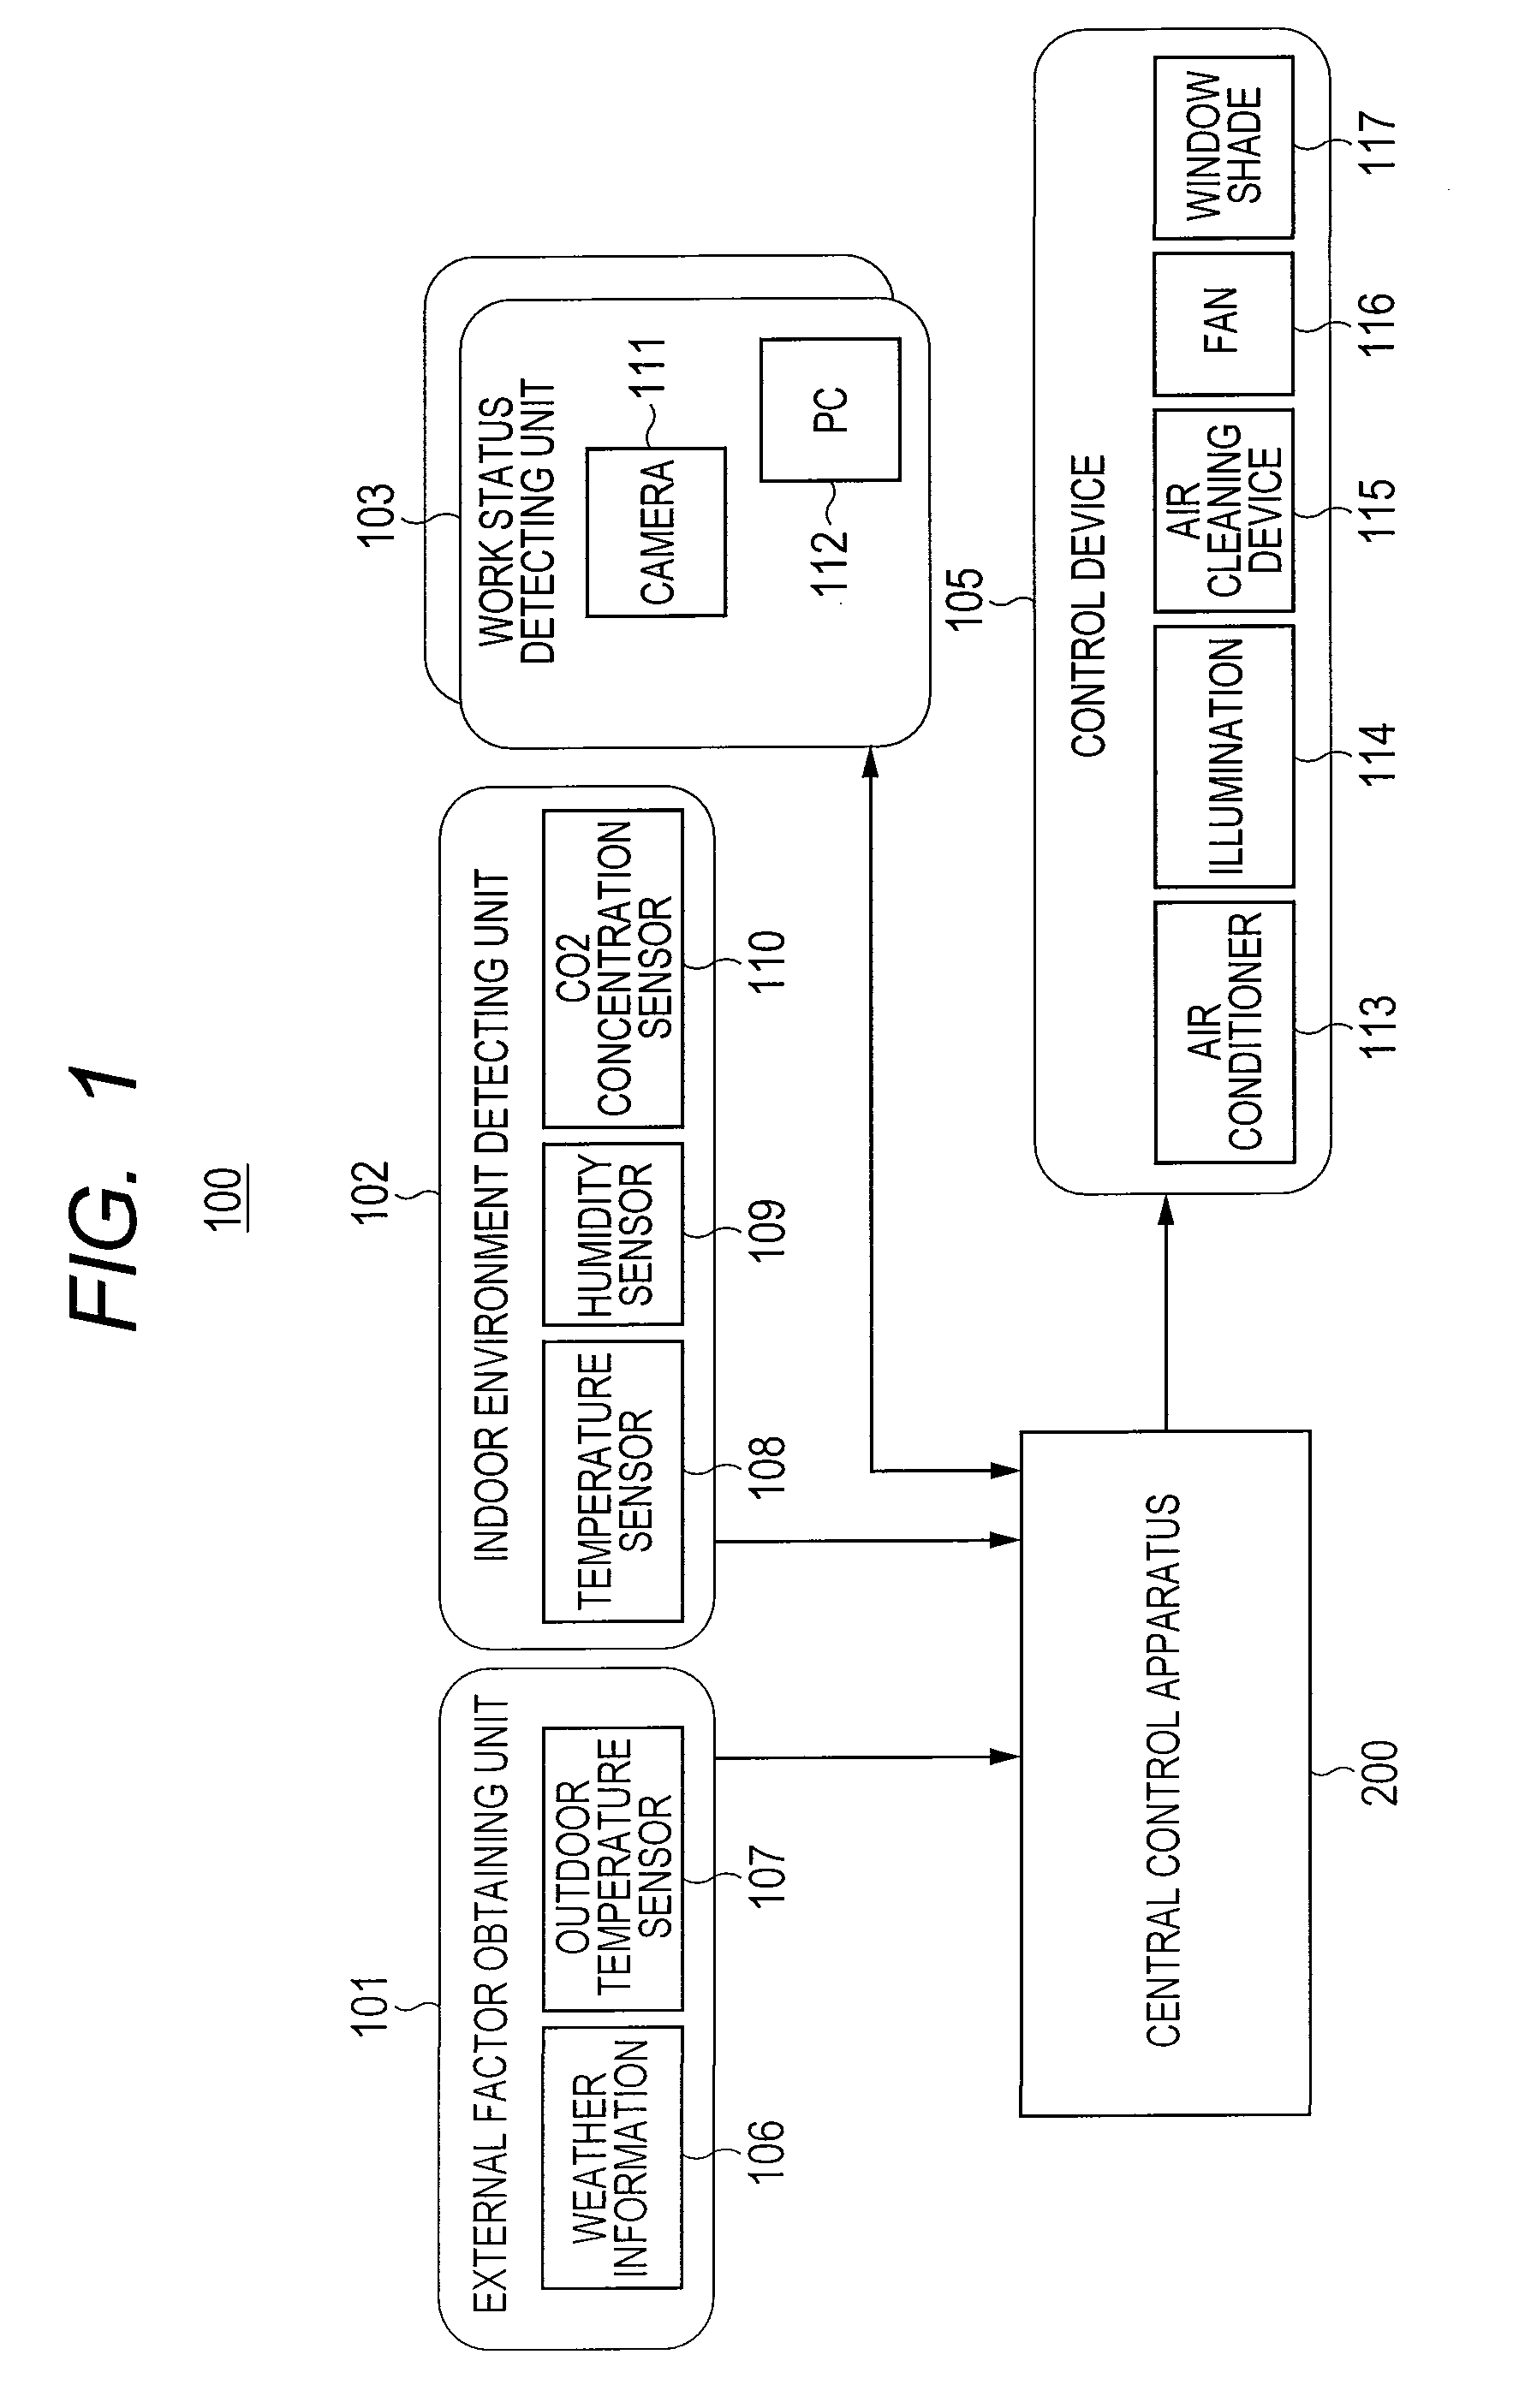 Intra-Area Environmental Control System and Intra-Area Environmental Control Method